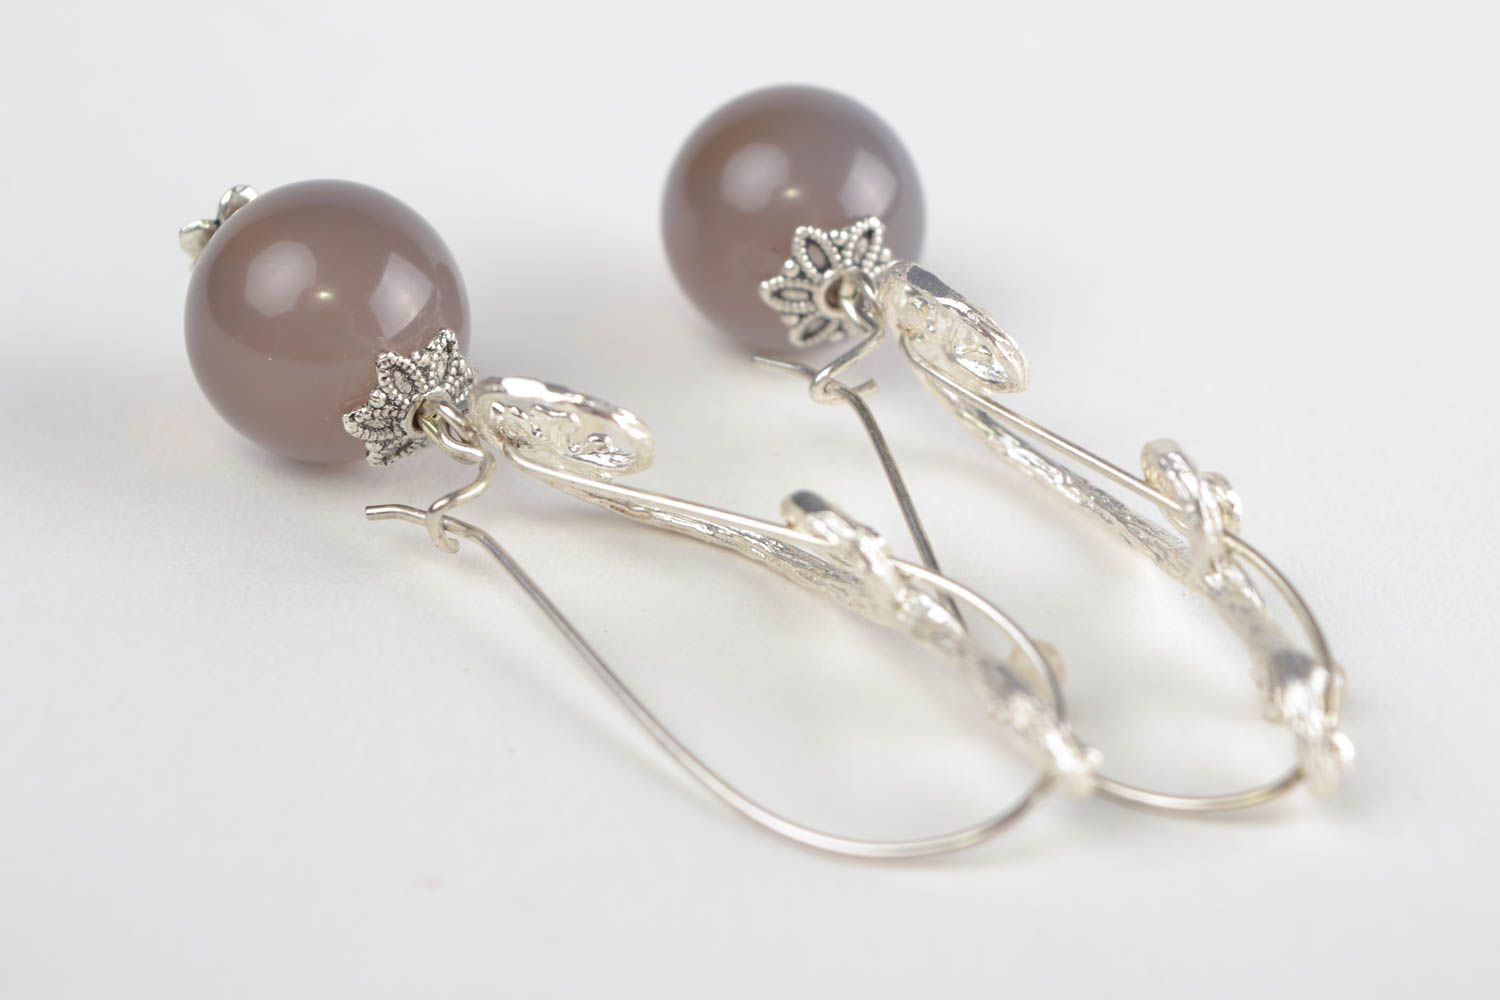 Handmade exquisite dangling earrings with fancy fittings and gray agate beads photo 5